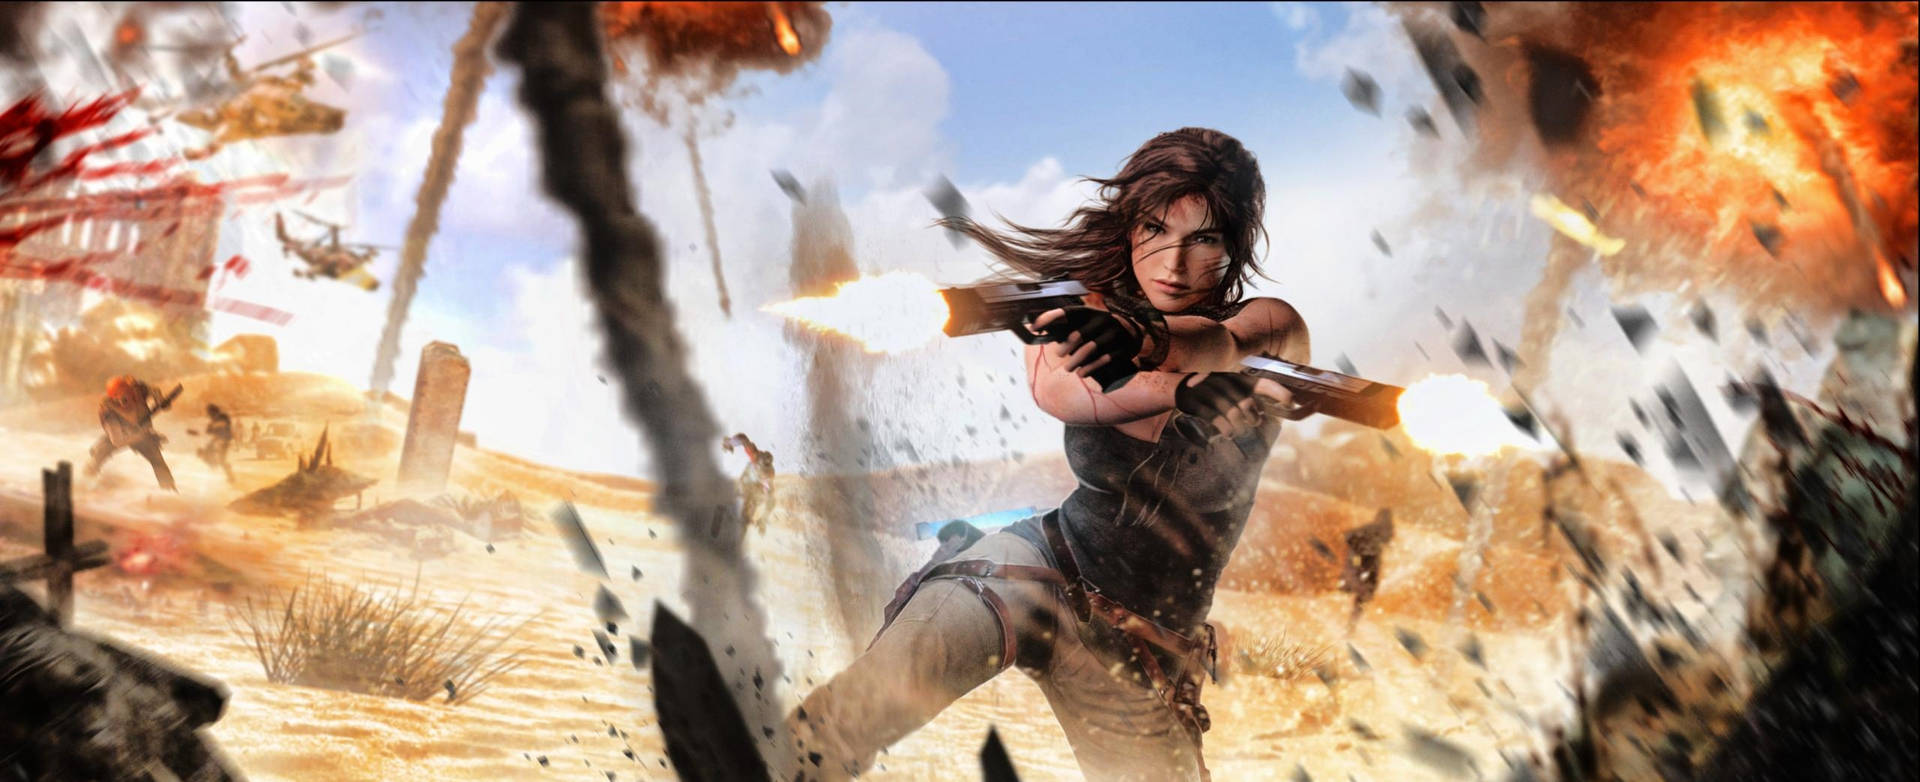 "Lara Croft in her classic outfit battles a dangerous enemy in Tomb Raider 9." Wallpaper